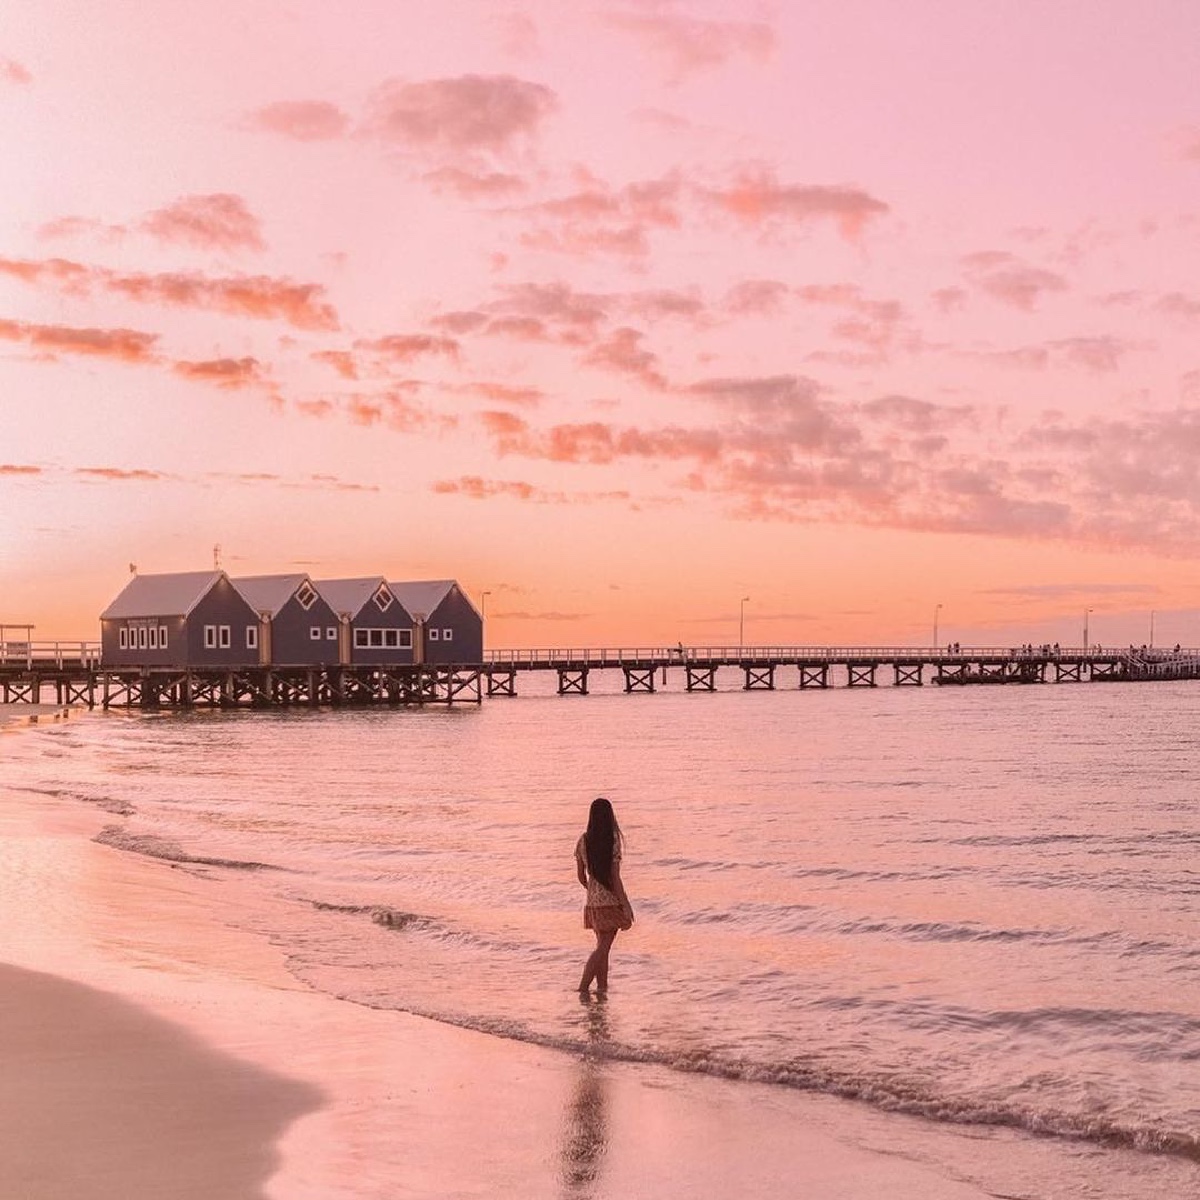 Now, THIS is what we call a sunset 💗🧡 Captured by IG/lolahubner, this postcard-perfect scene is #BusseltonJetty in @westaustralia. Did you know this is the longest wooden jetty in the southern hemisphere? 🤯 #seeaustralia #comeandsaygday